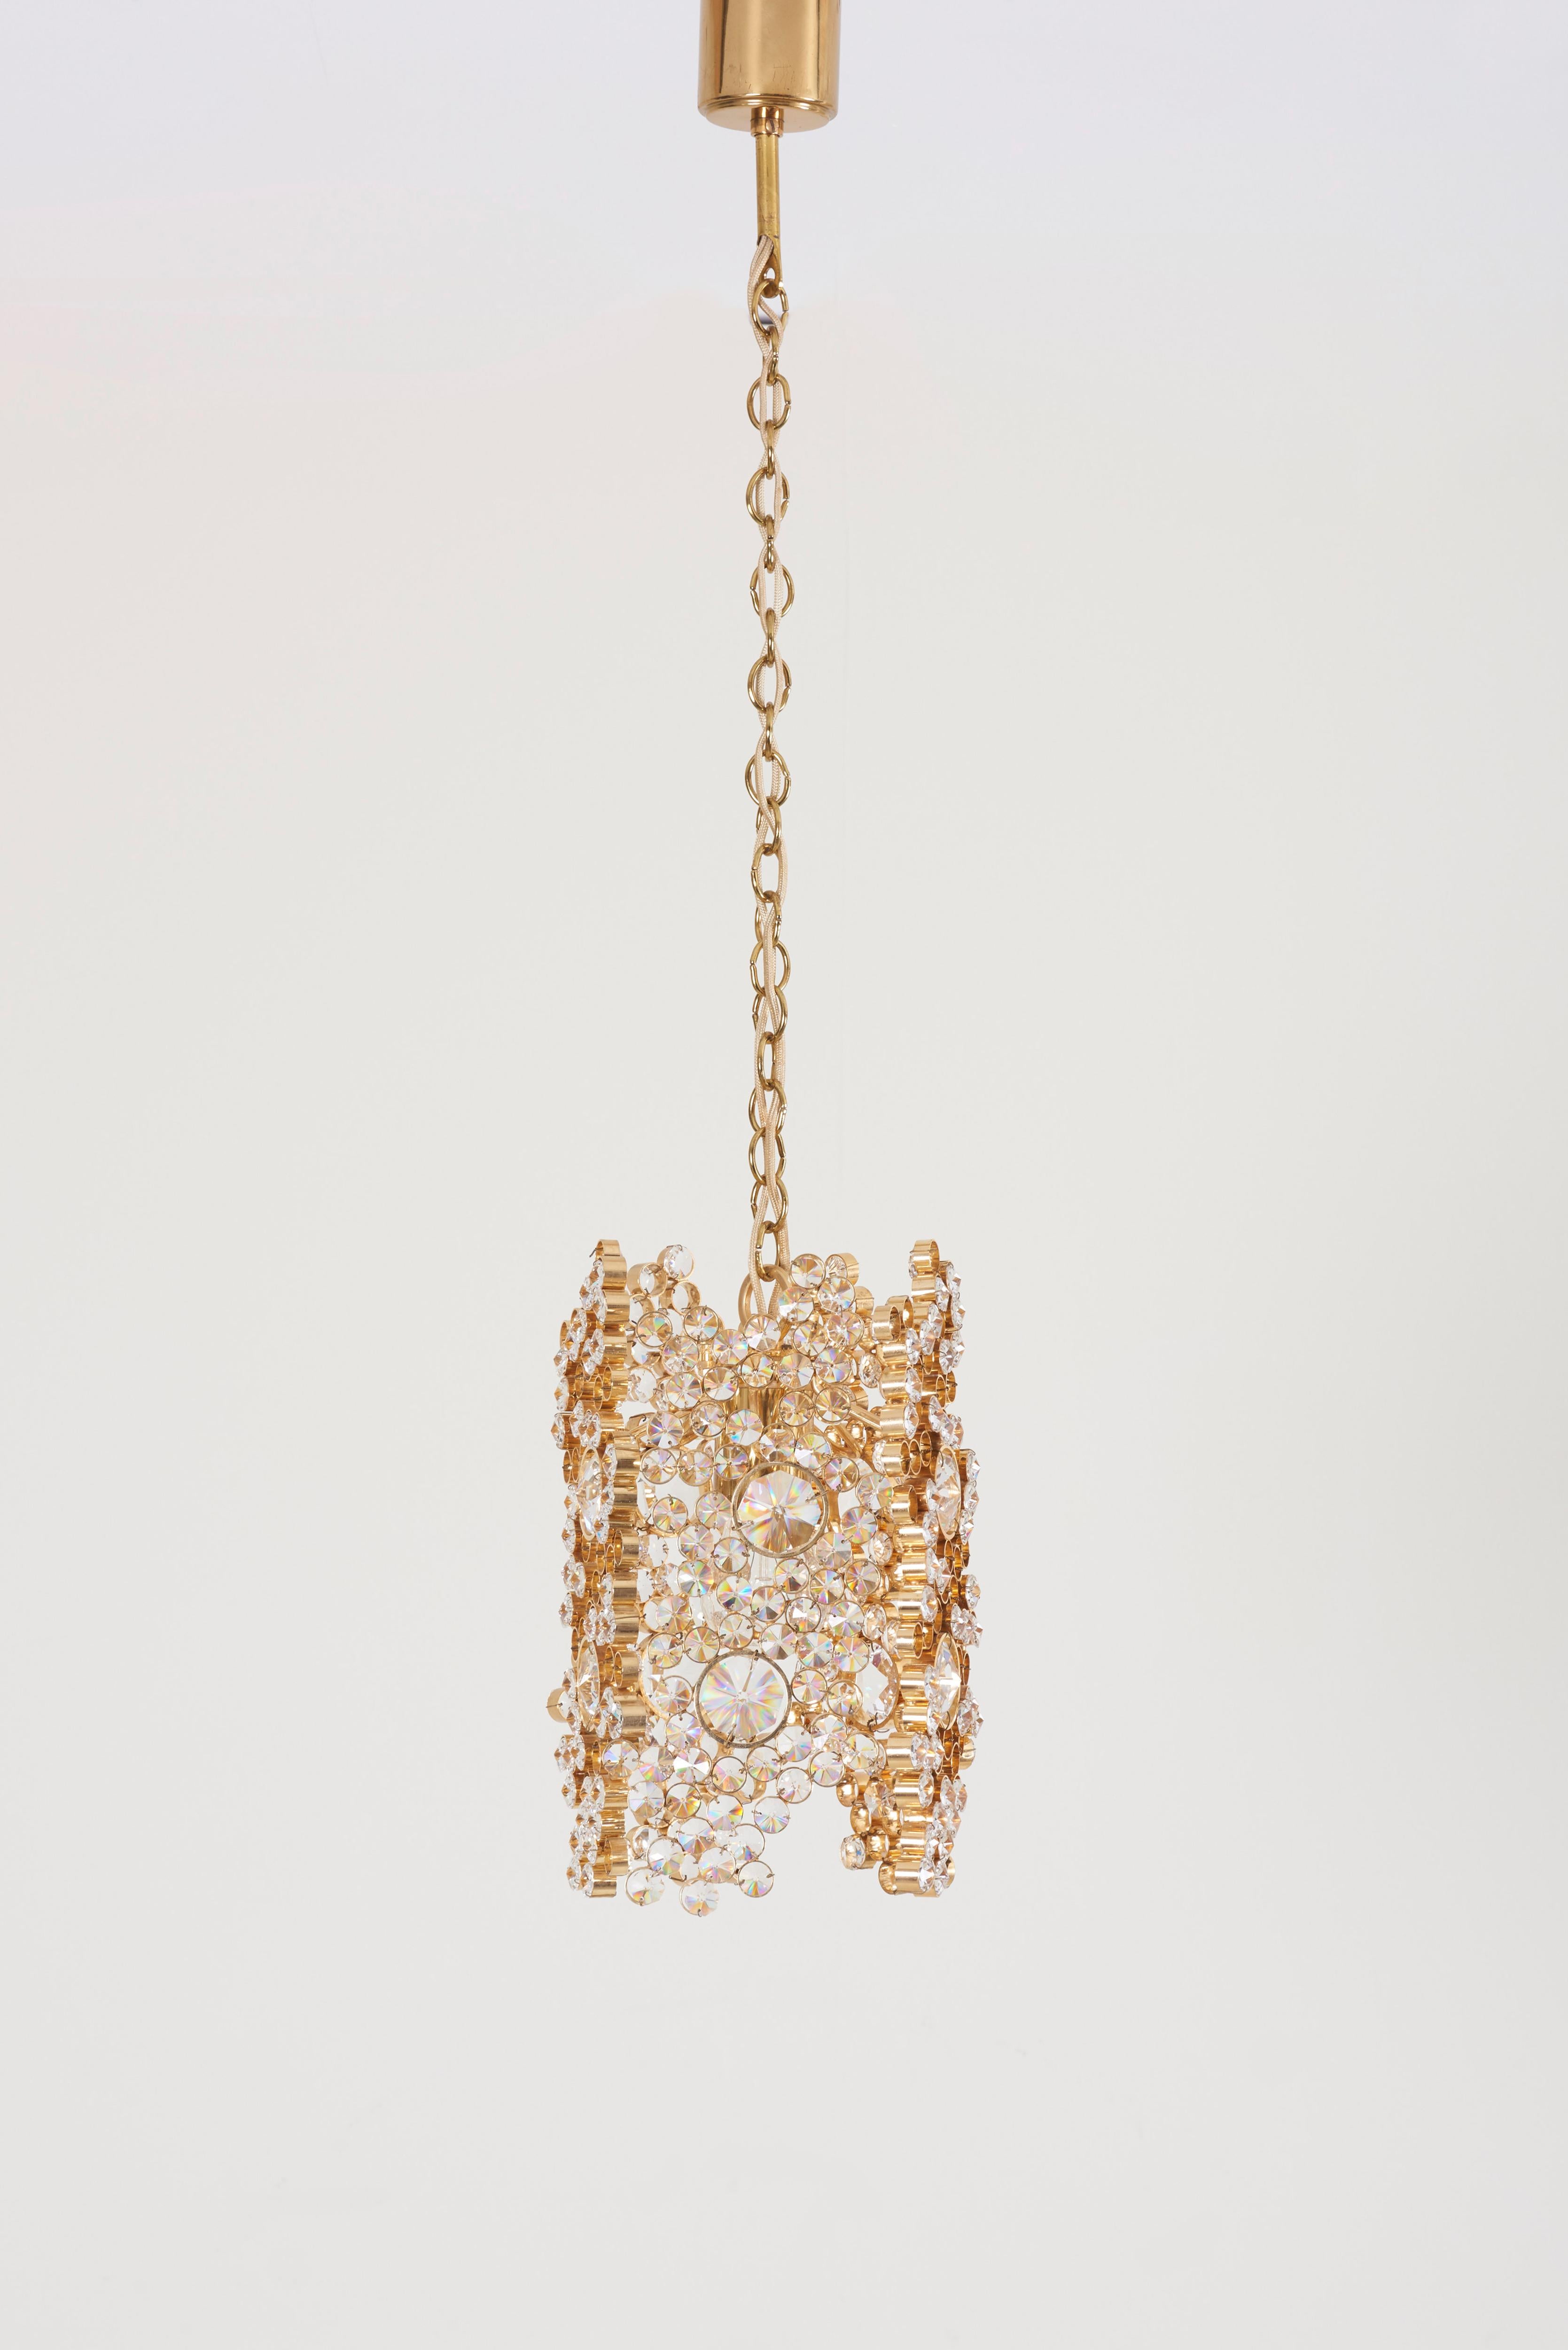 Palwa gilded brass and crystal glass encrusted pendant lamp, model S107.
The lamp is handmade and in excellent condition and float every room in a beautiful warm light. It is fitted with one E27 bulb. 

To be on the safe side, the lamp should be